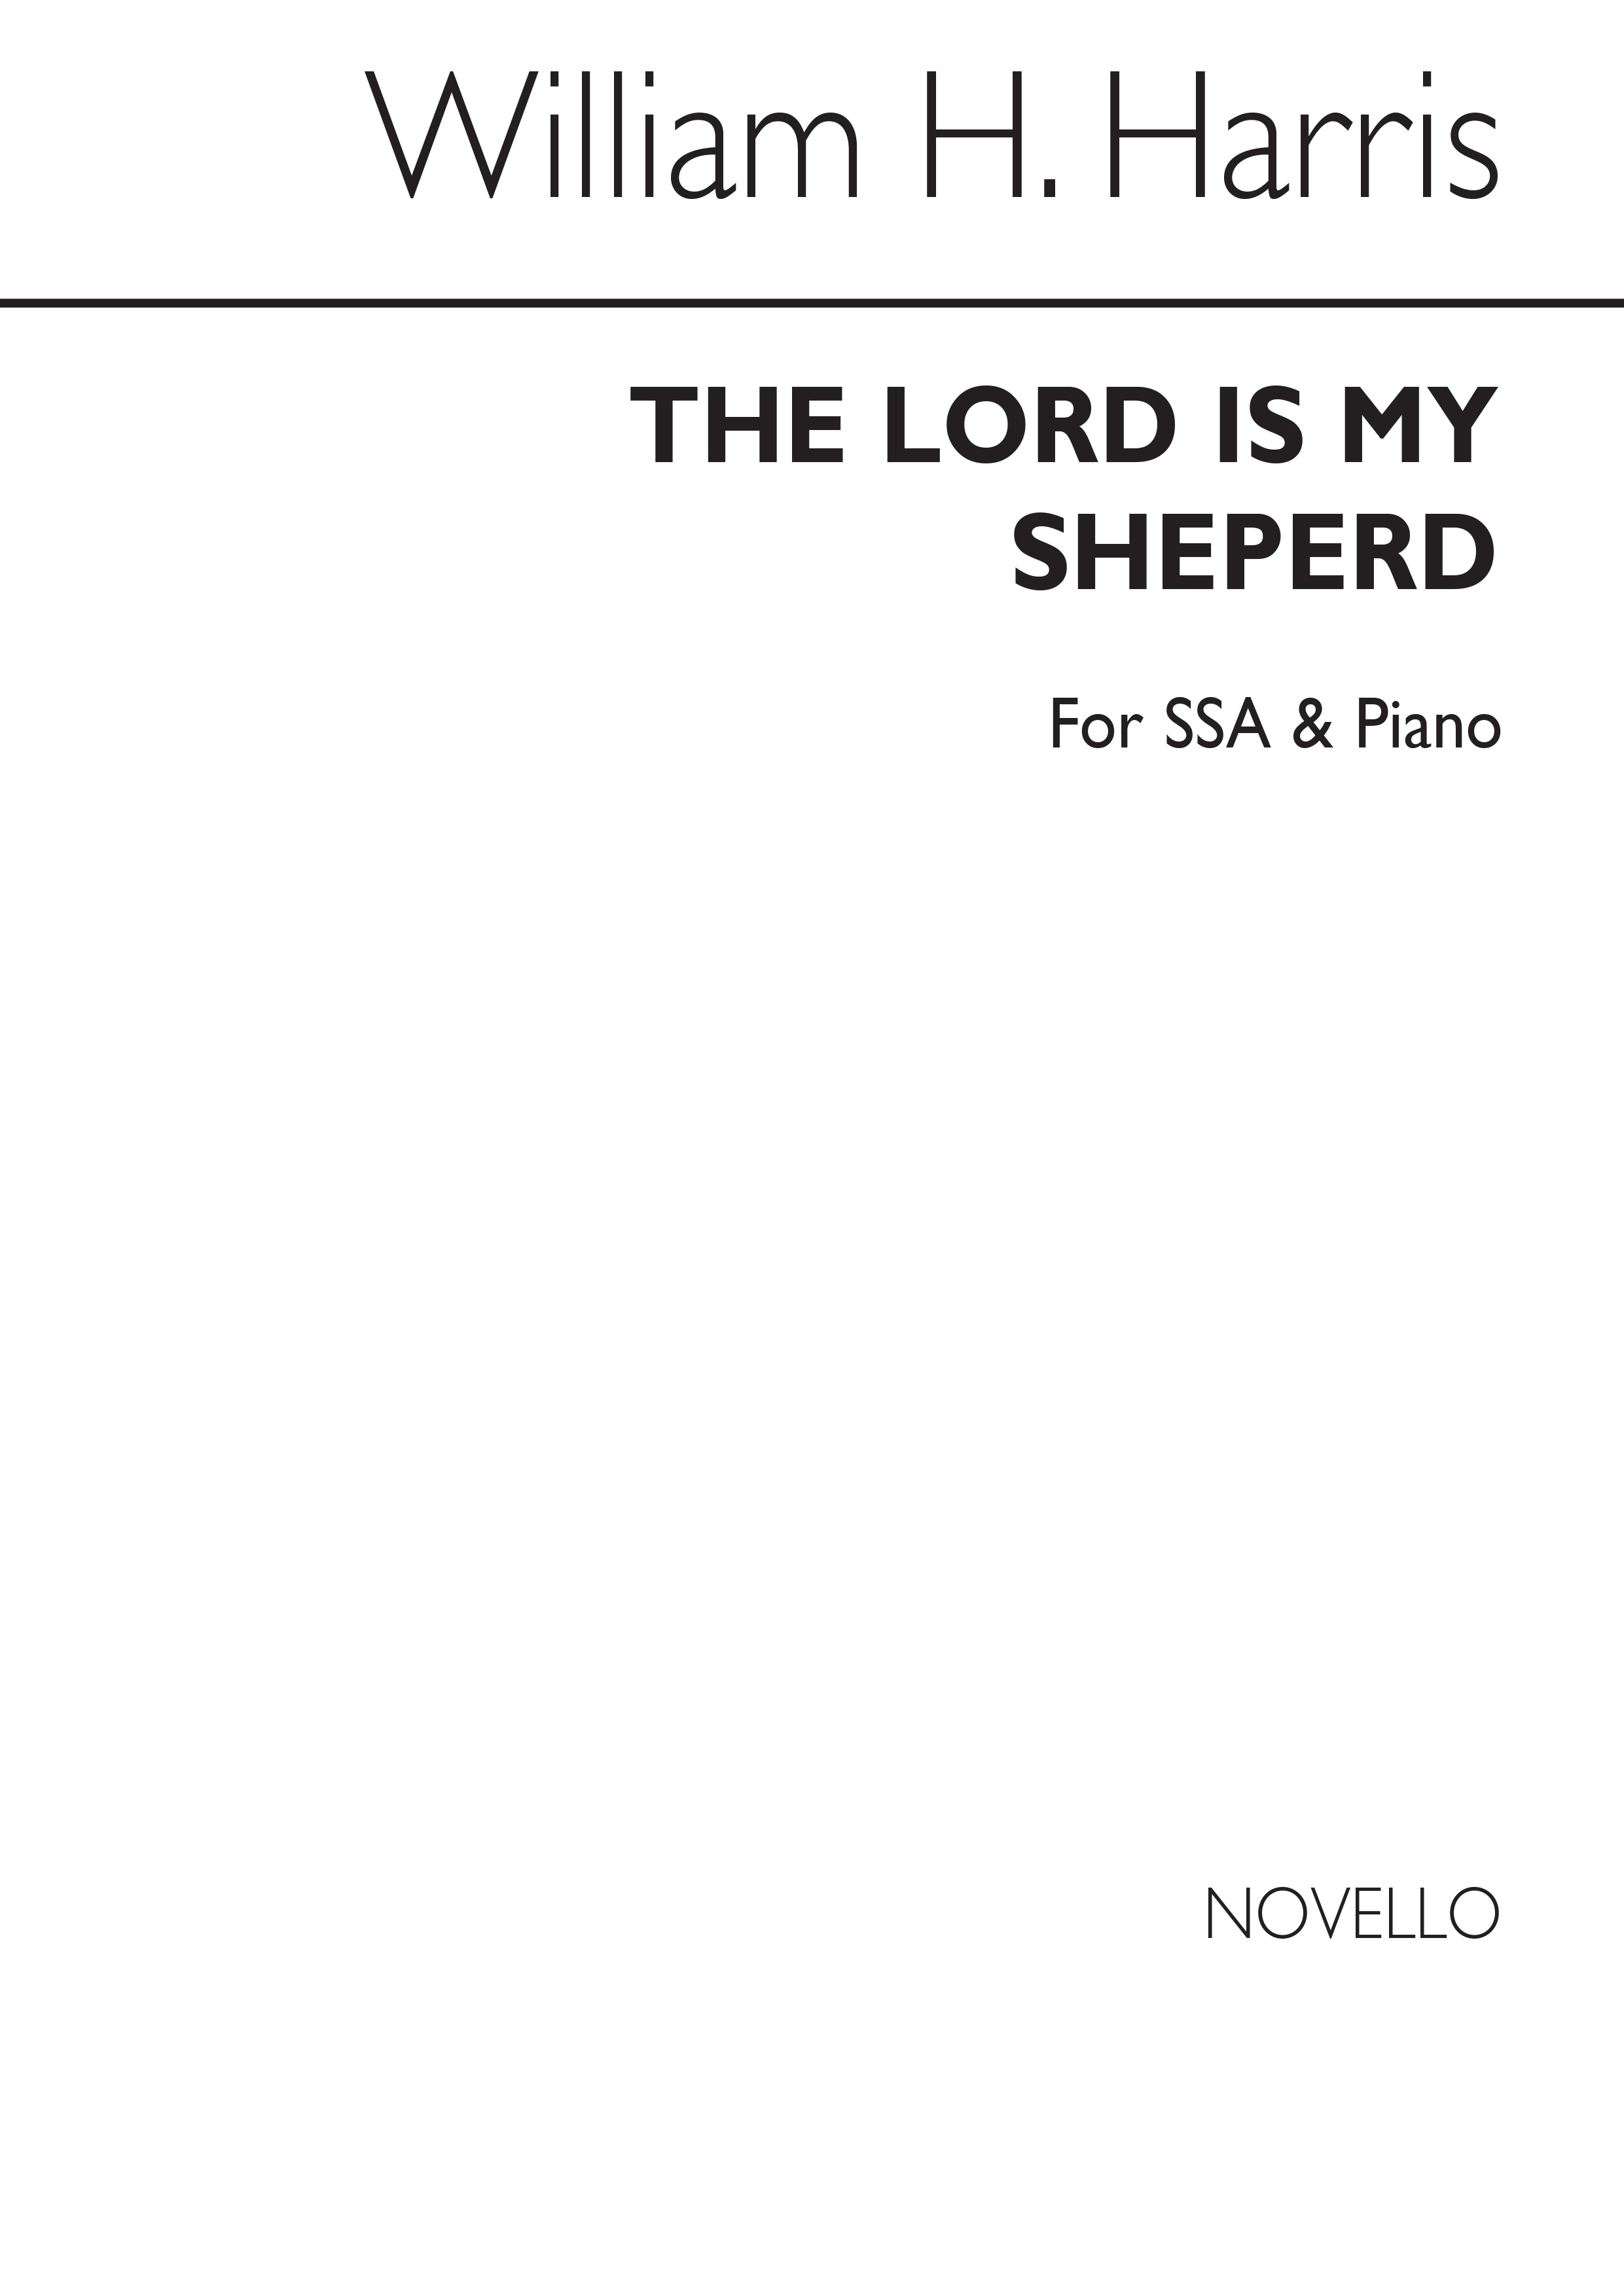 Harris, W The Lord Is My Shepherd (Psalm 23) Ssa And Piano